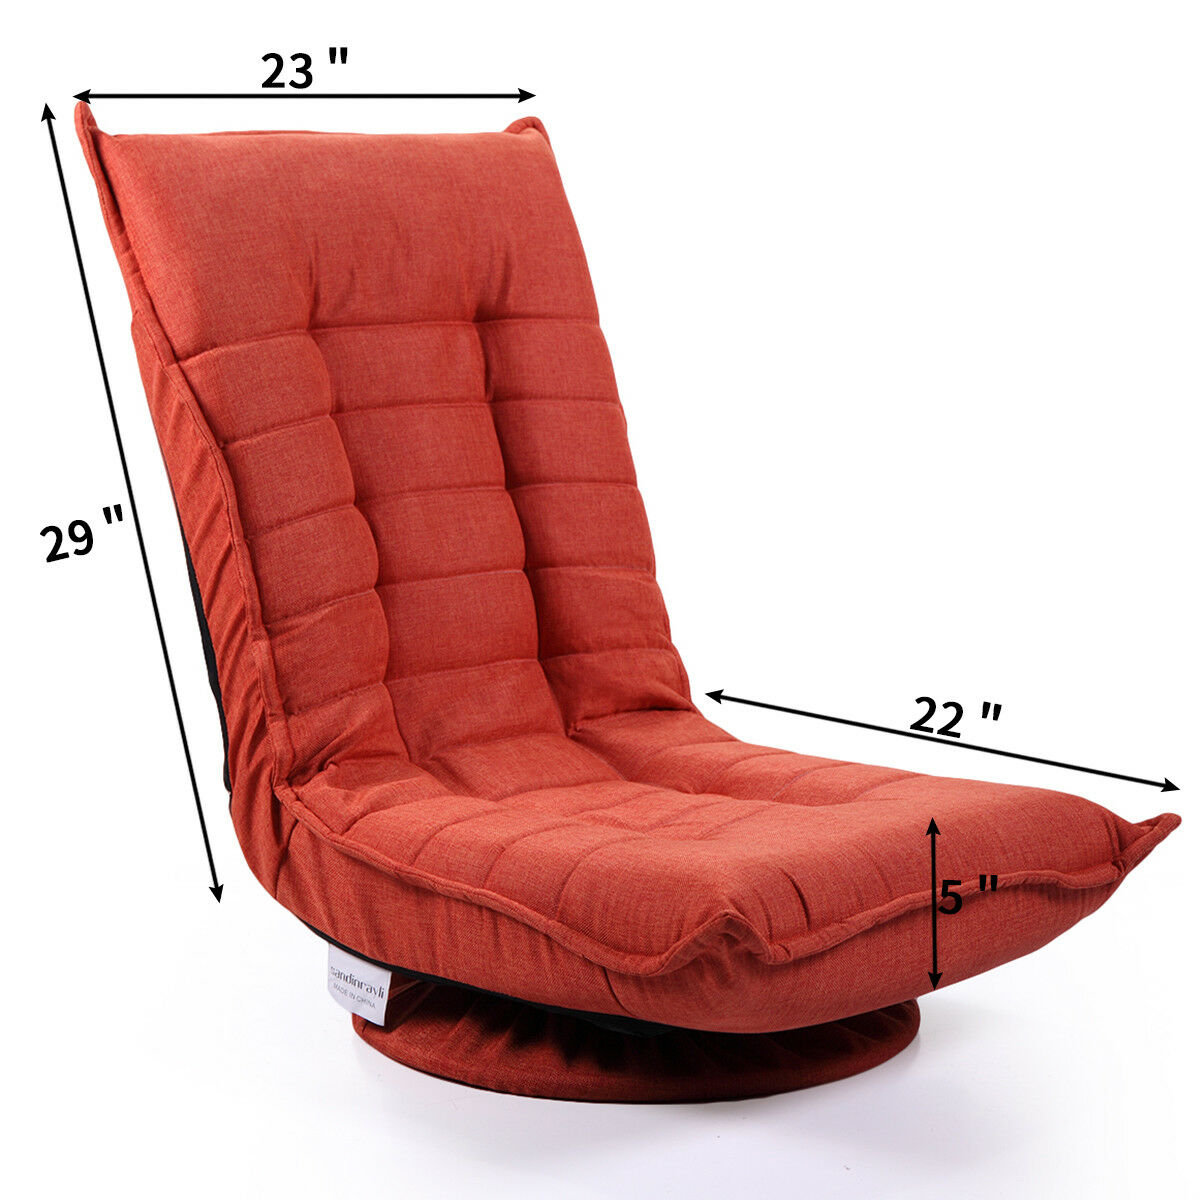 Veryke Lounge Chair, Red - image 2 of 6